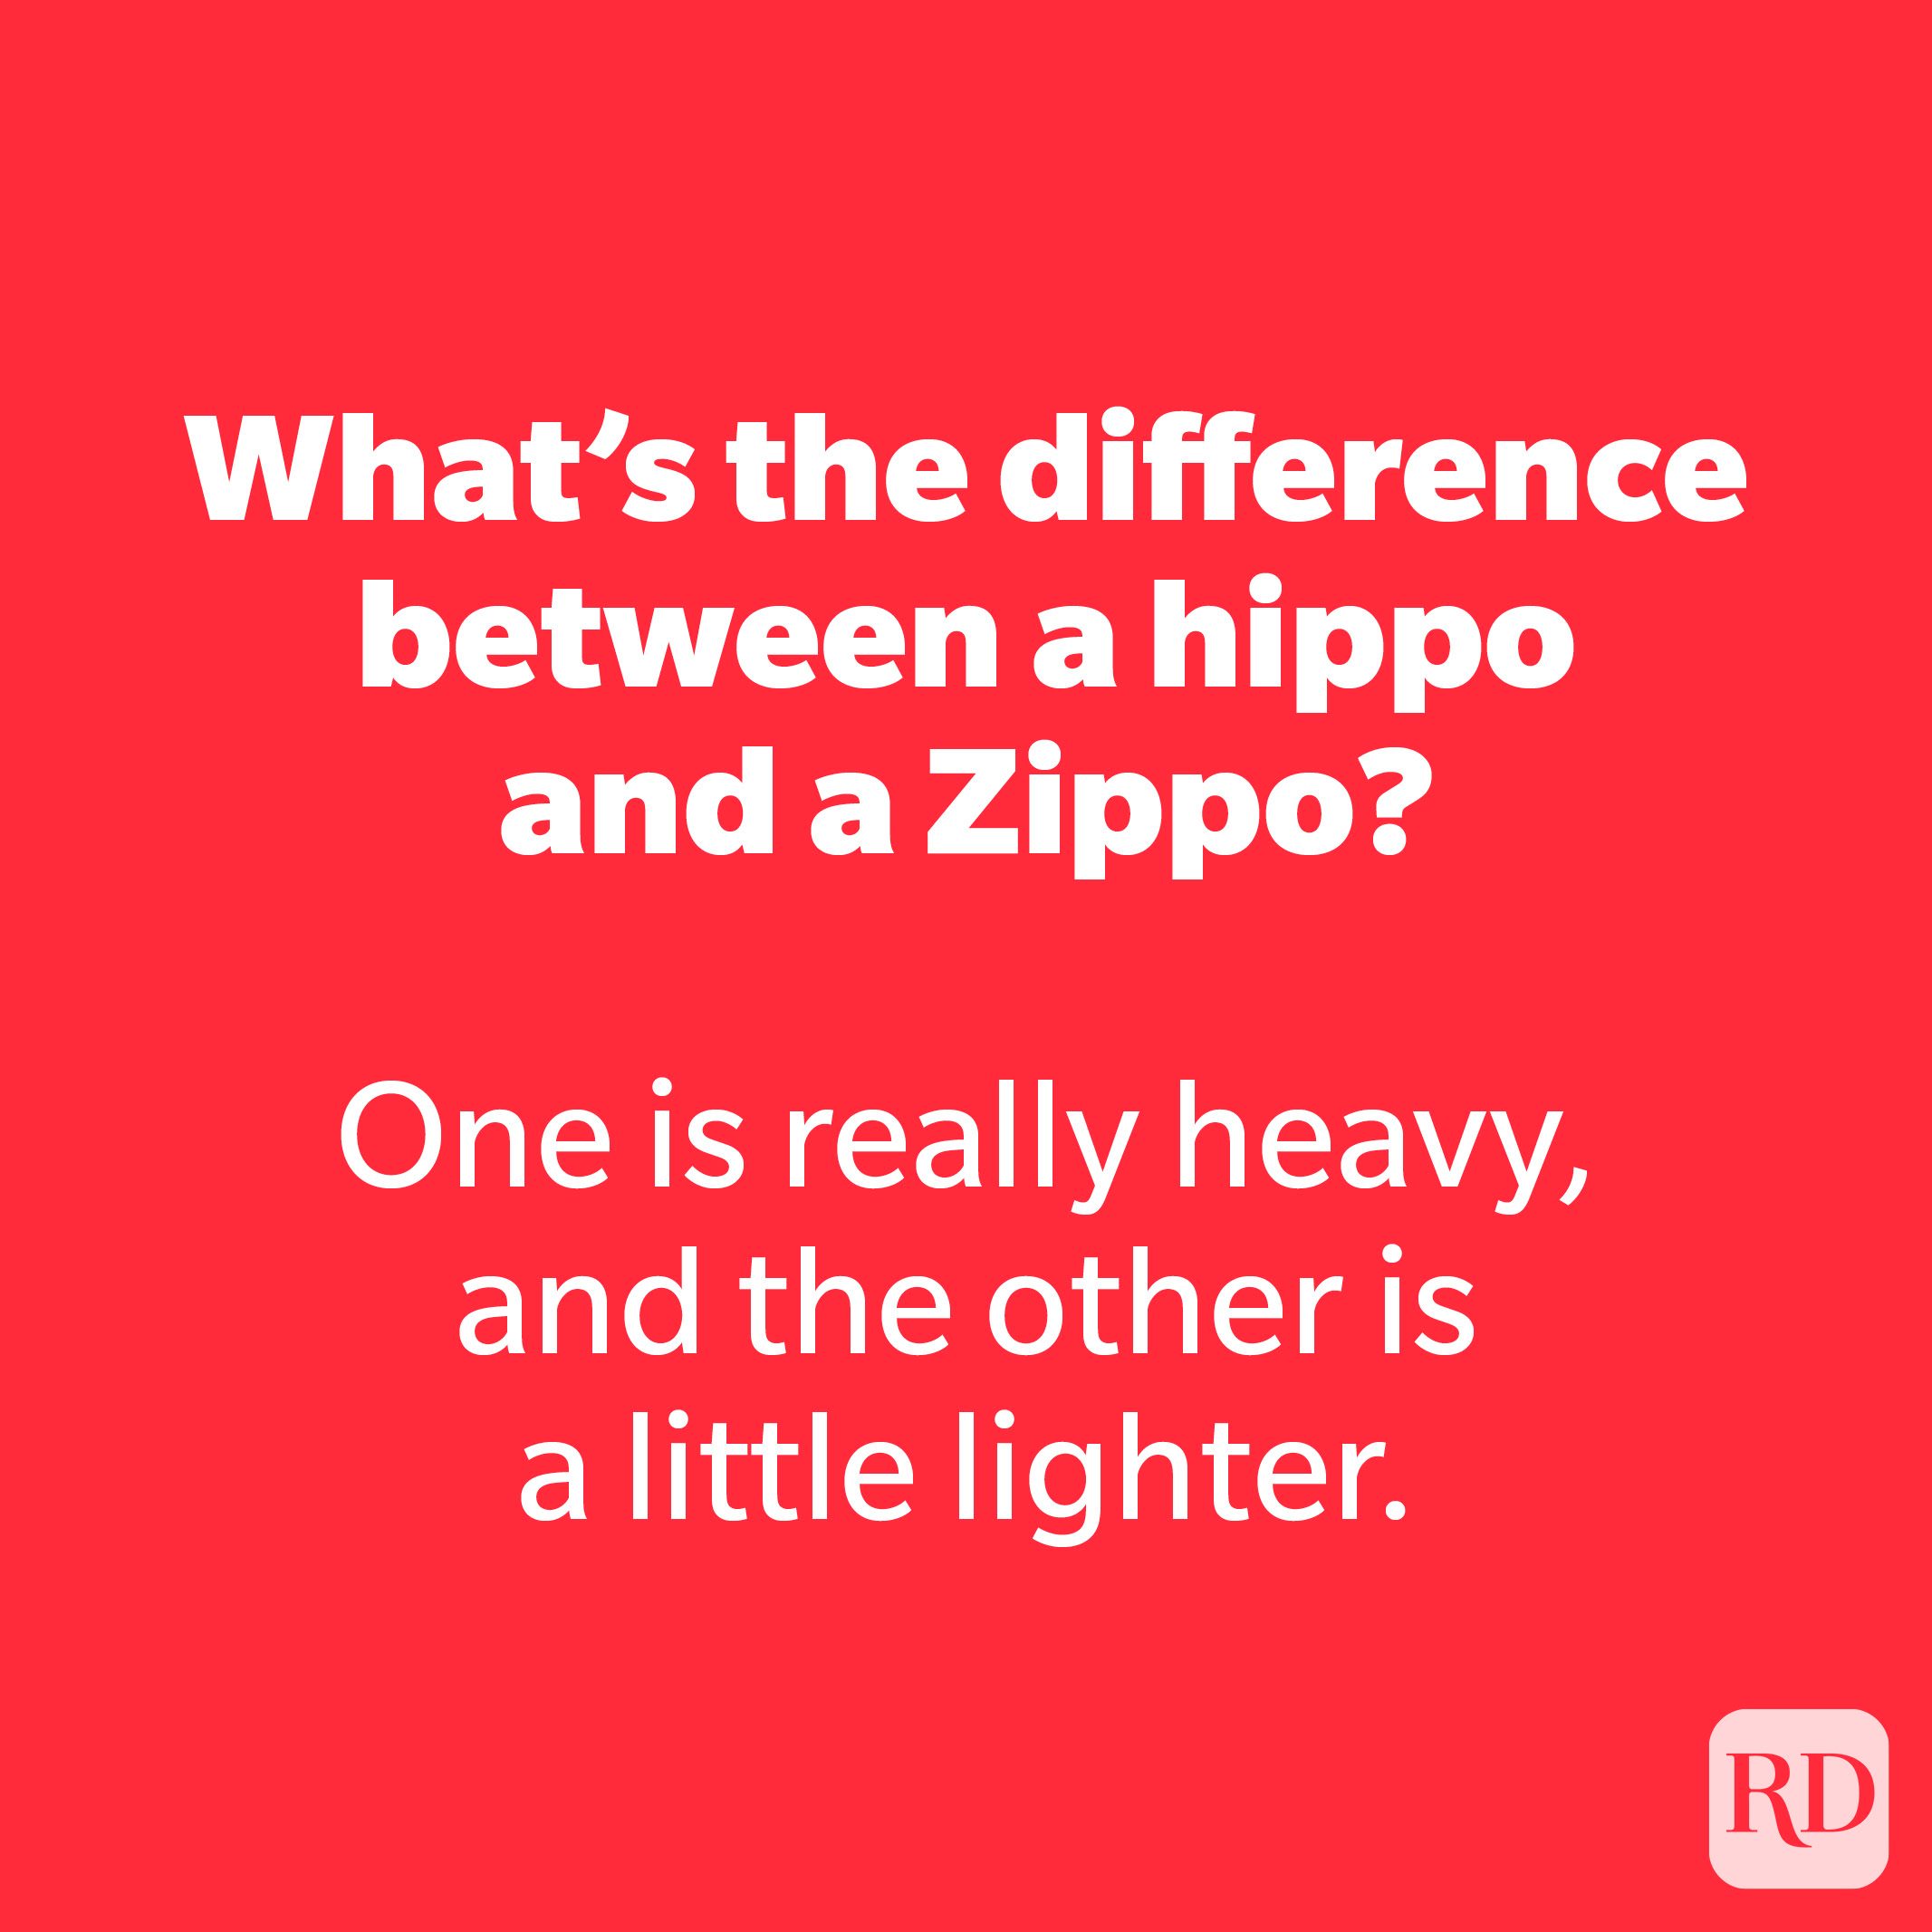 What's the difference between a hippo and a Zippo? 